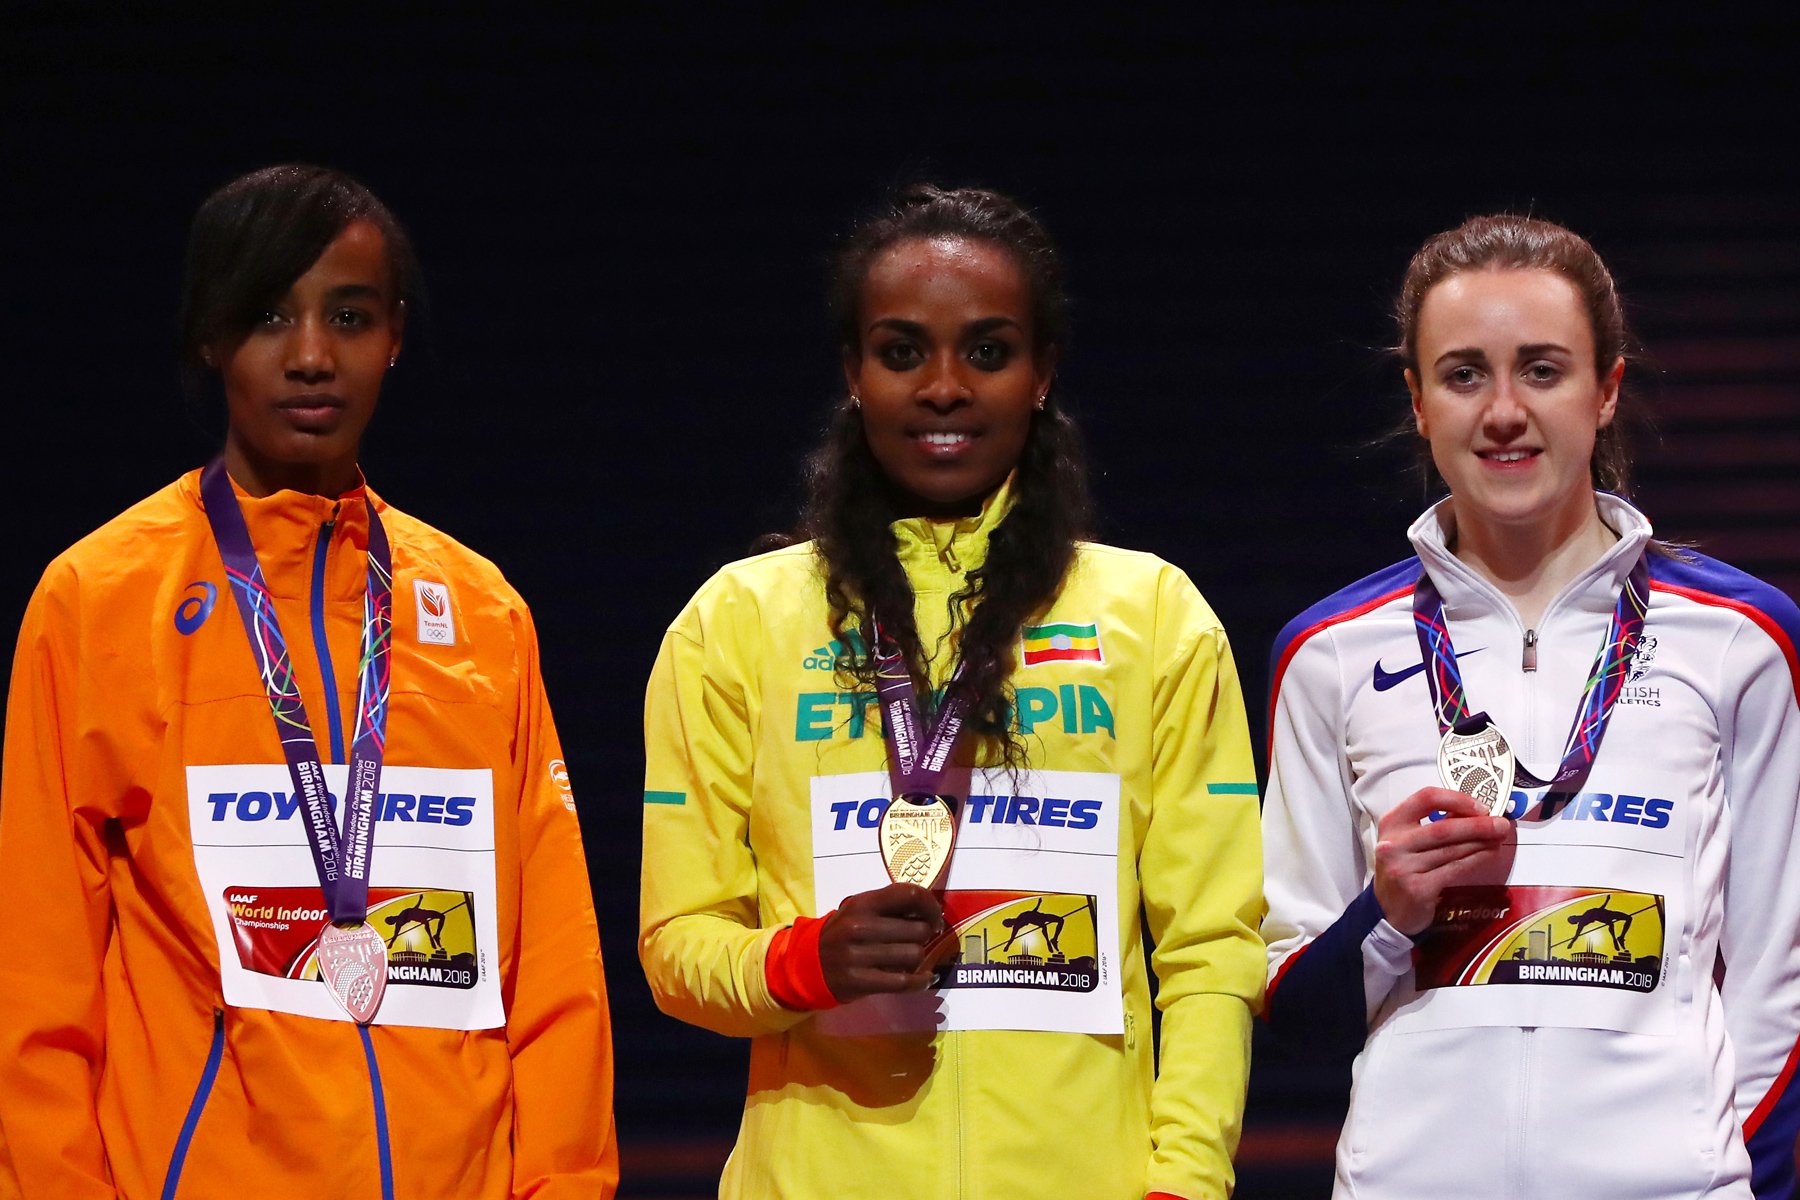 Genzebe Dibaba of Ethiopia celebrates winning the womens 3000 metres final ahead of Sifan Hassan of Netherlands and Laura Muir of Great Britian on Day One of the IAAF World Indoor Championships at Arena Birmingham on March 1, 2018 in Birmingham, England. credit: Photo by Michael Steele/Getty Images for IAAF